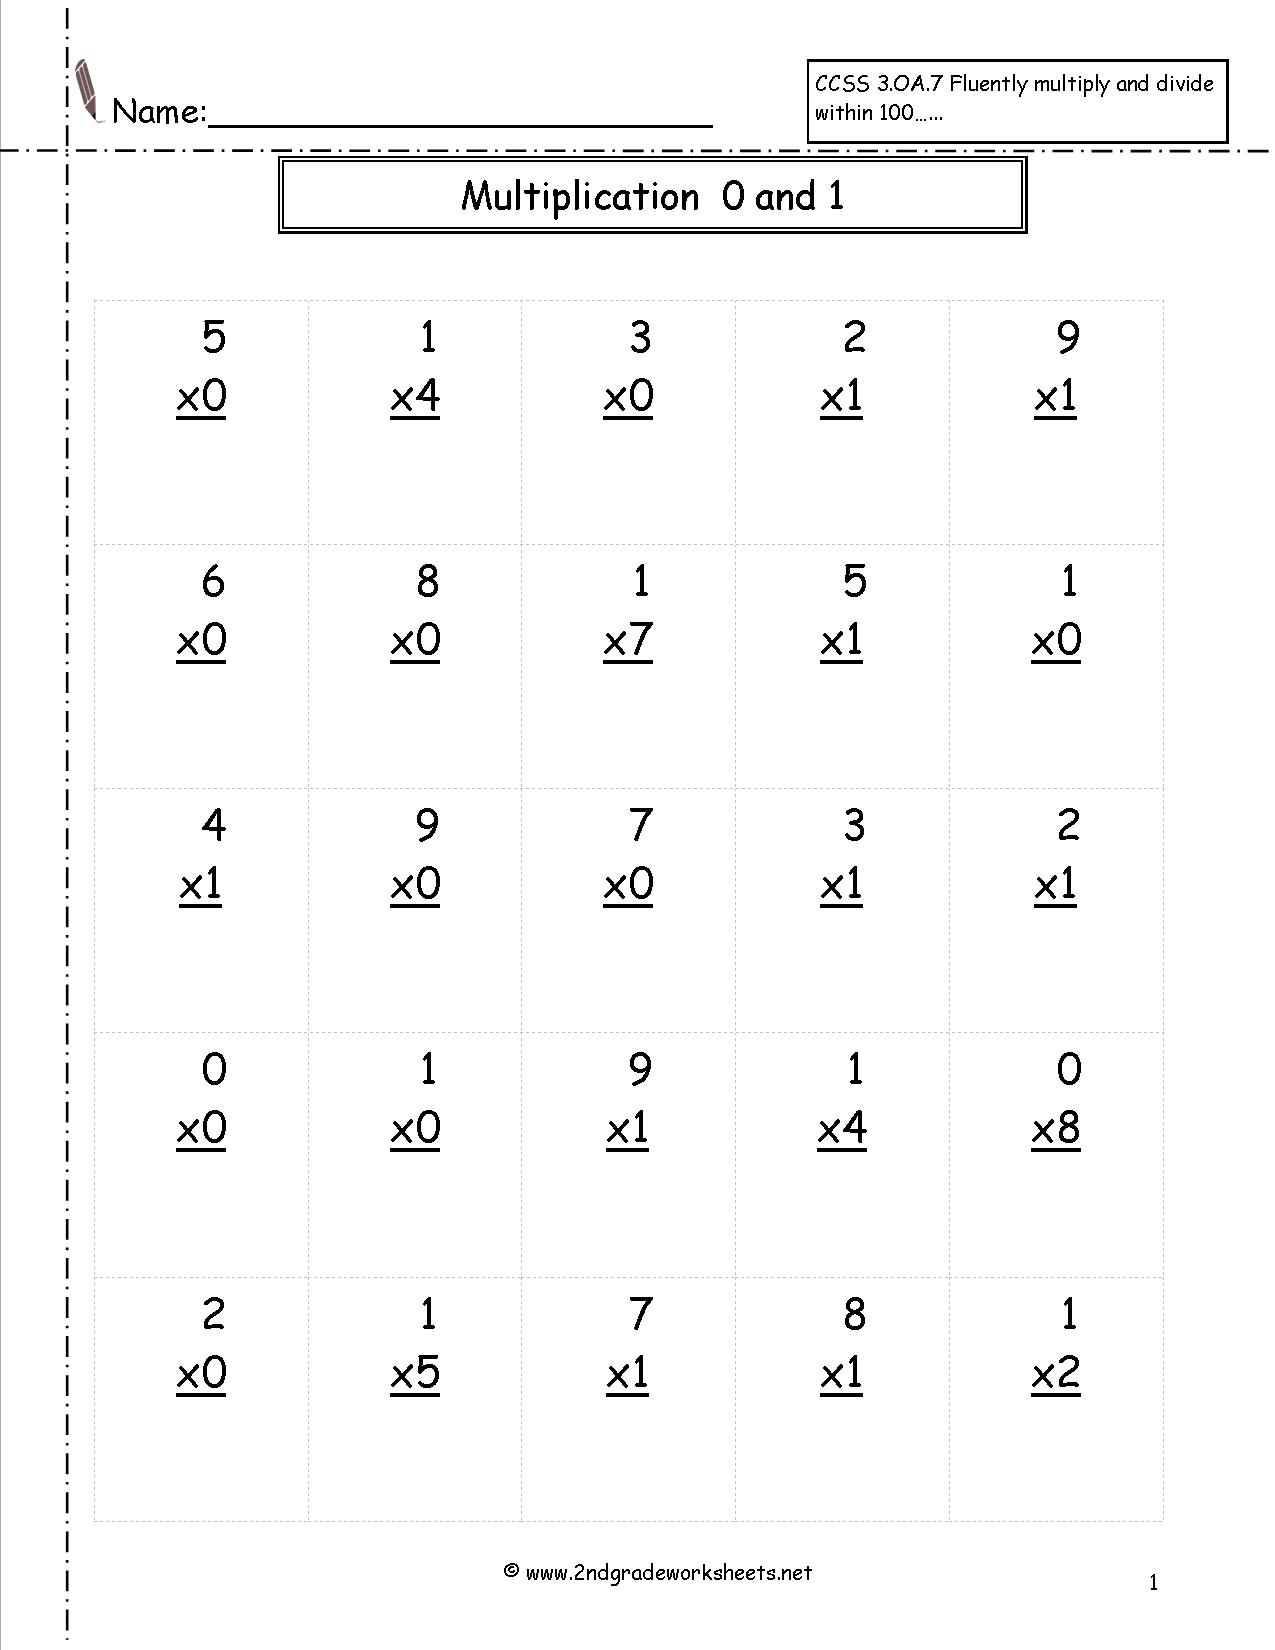 Multiplication Worksheets And Printouts within Multiplication Worksheets 7 Facts